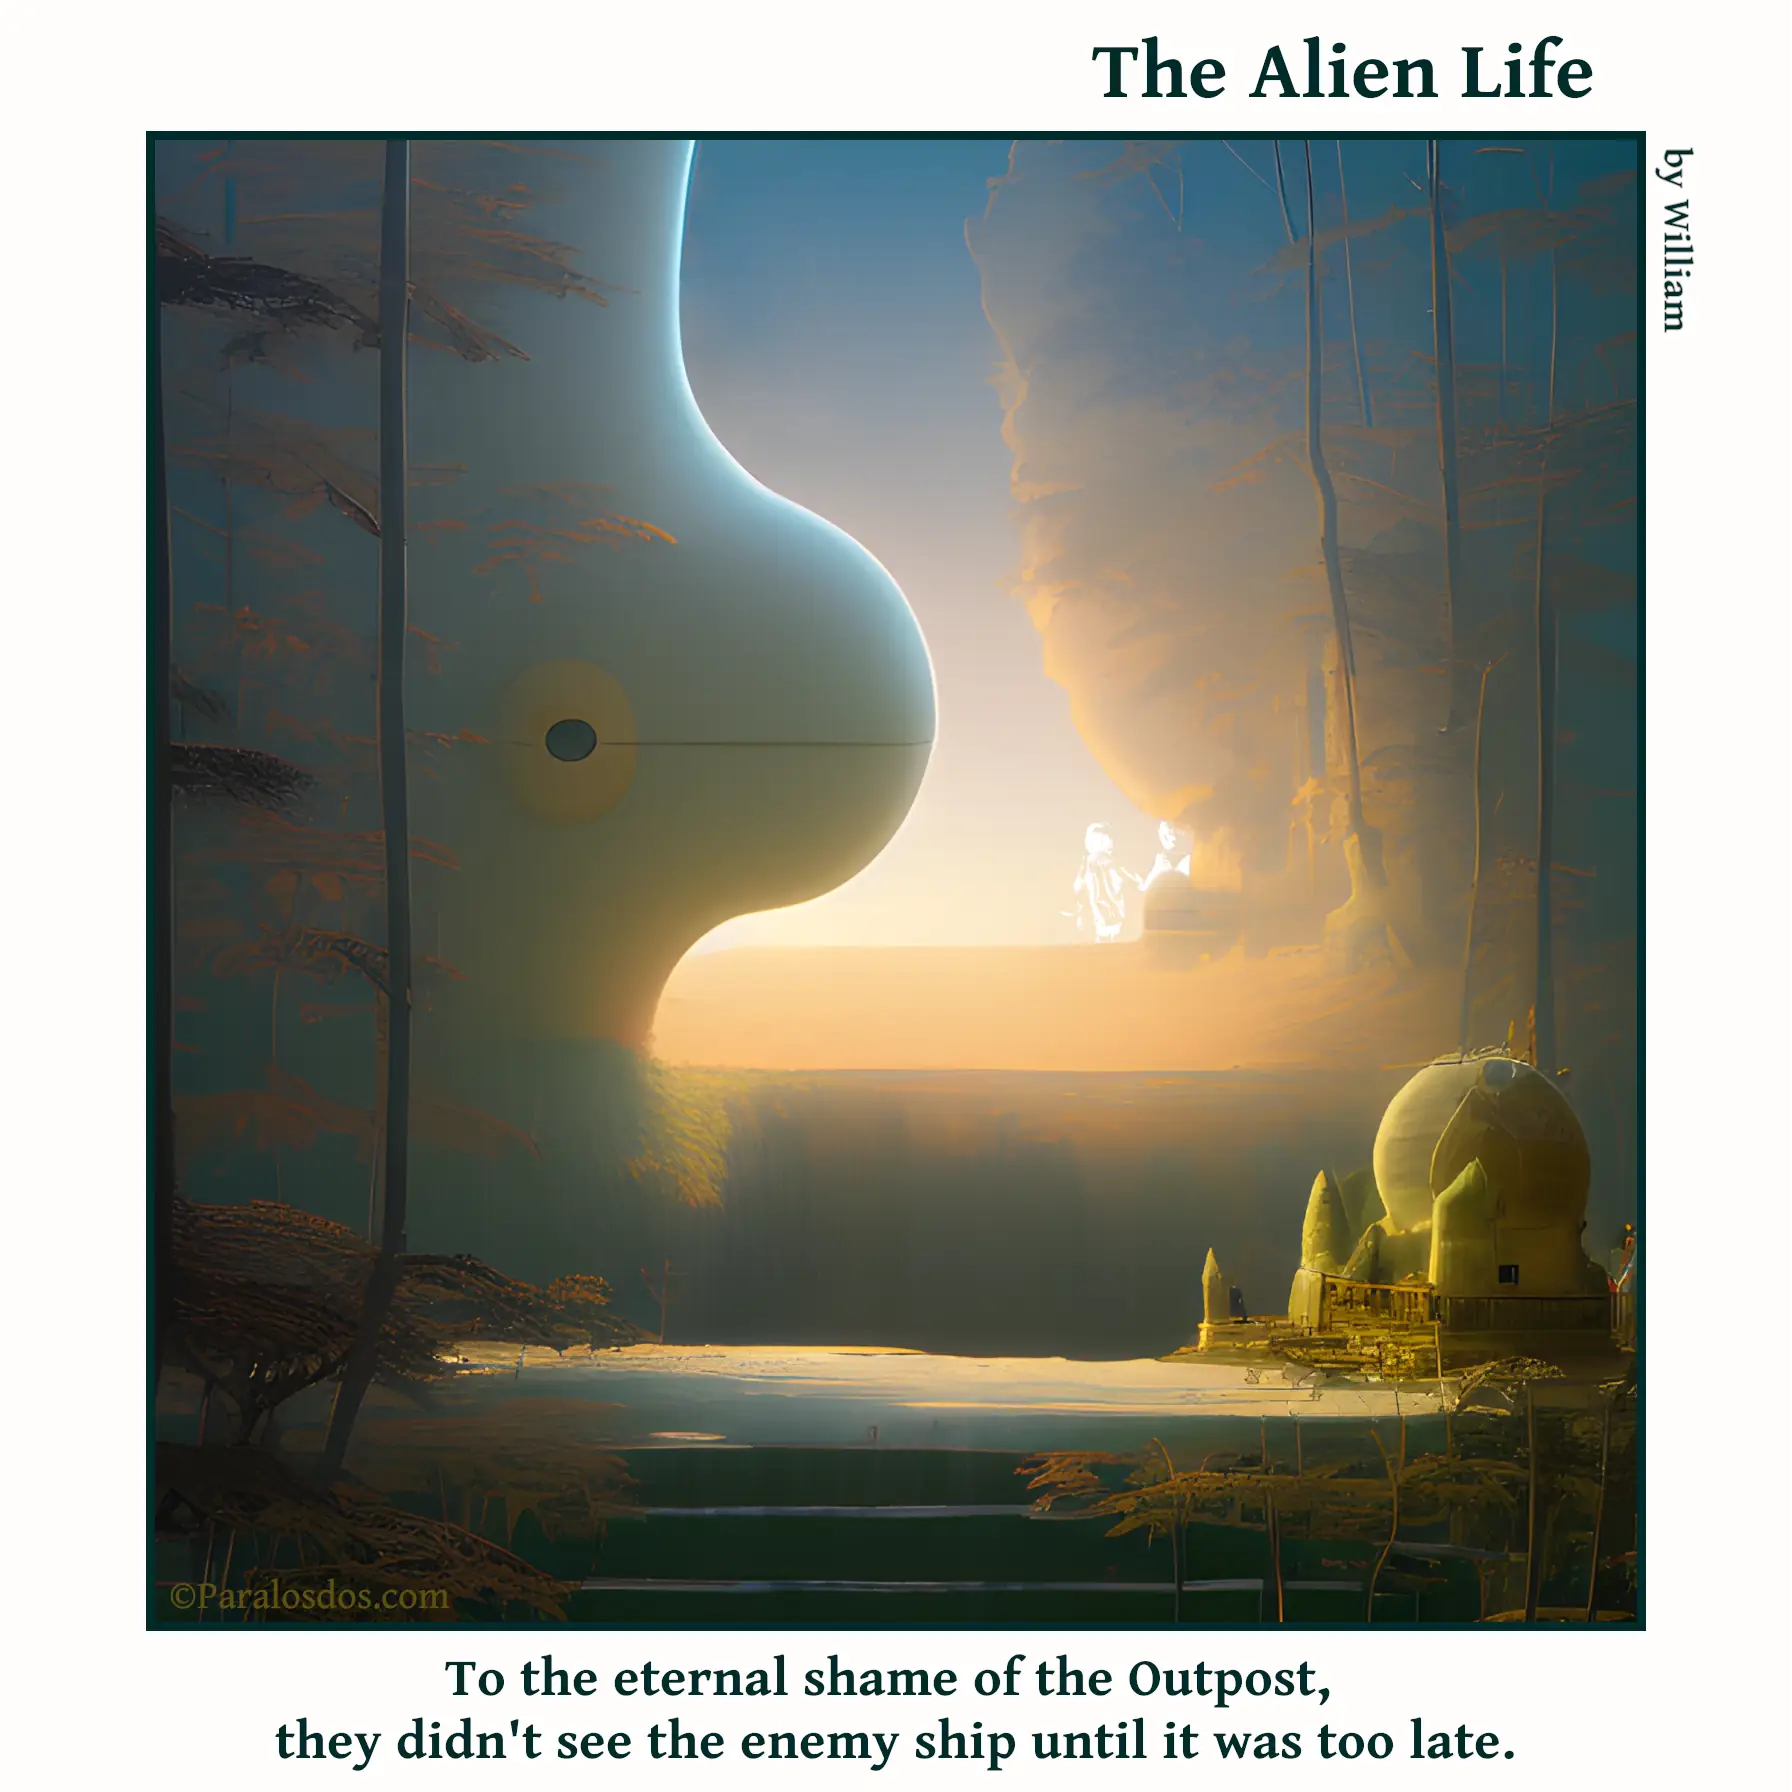 The Alien Life, one panel Comic. A humongous alien ship is about to pass an alien fort.The caption reads: To the eternal shame of the Outpost, they didn't see the enemy ship until it was too late.